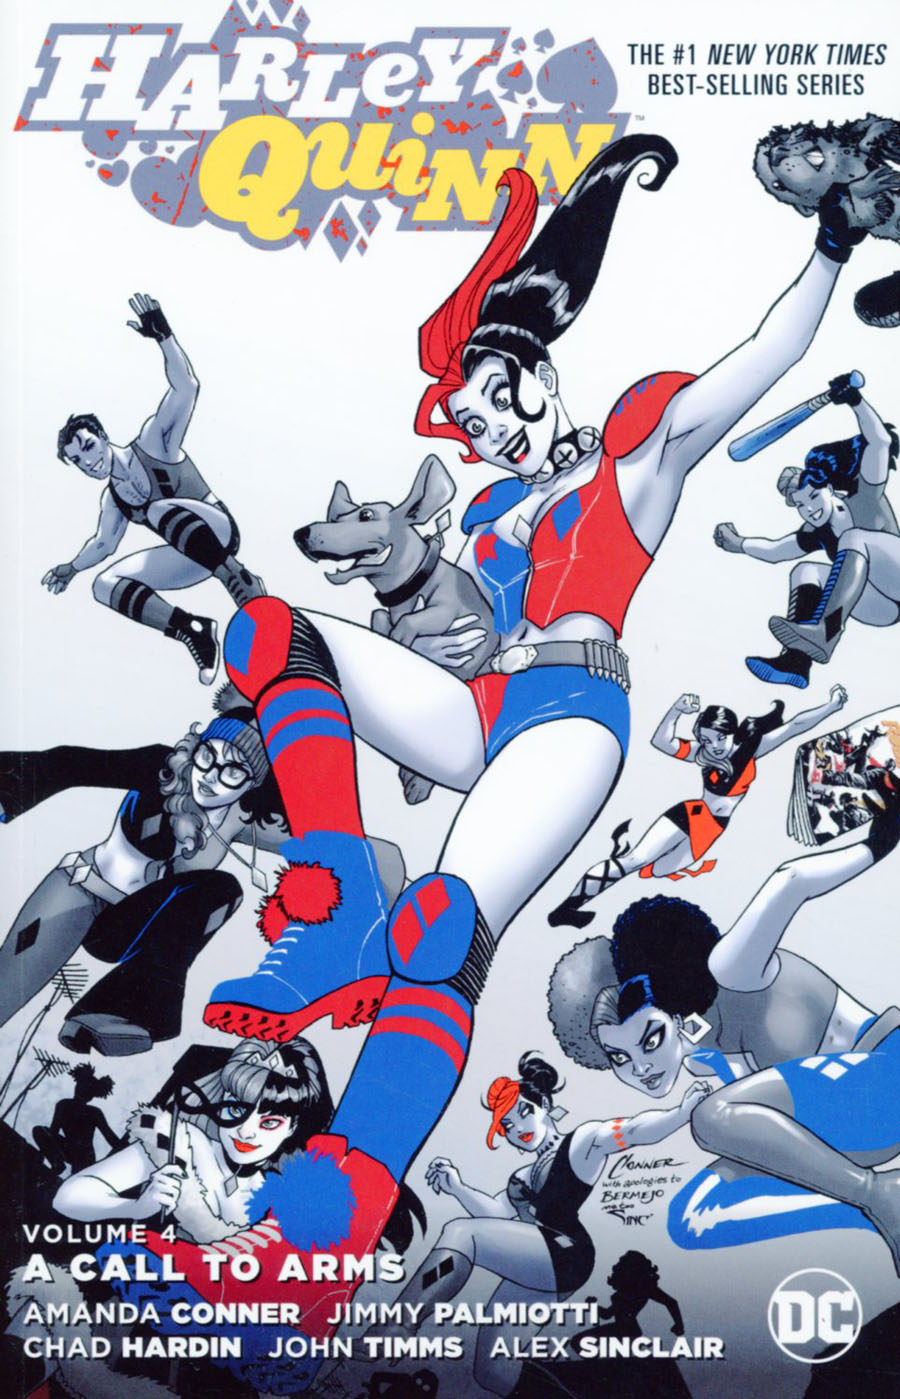 Harley Quinn (New 52) Vol 4 A Call To Arms TP